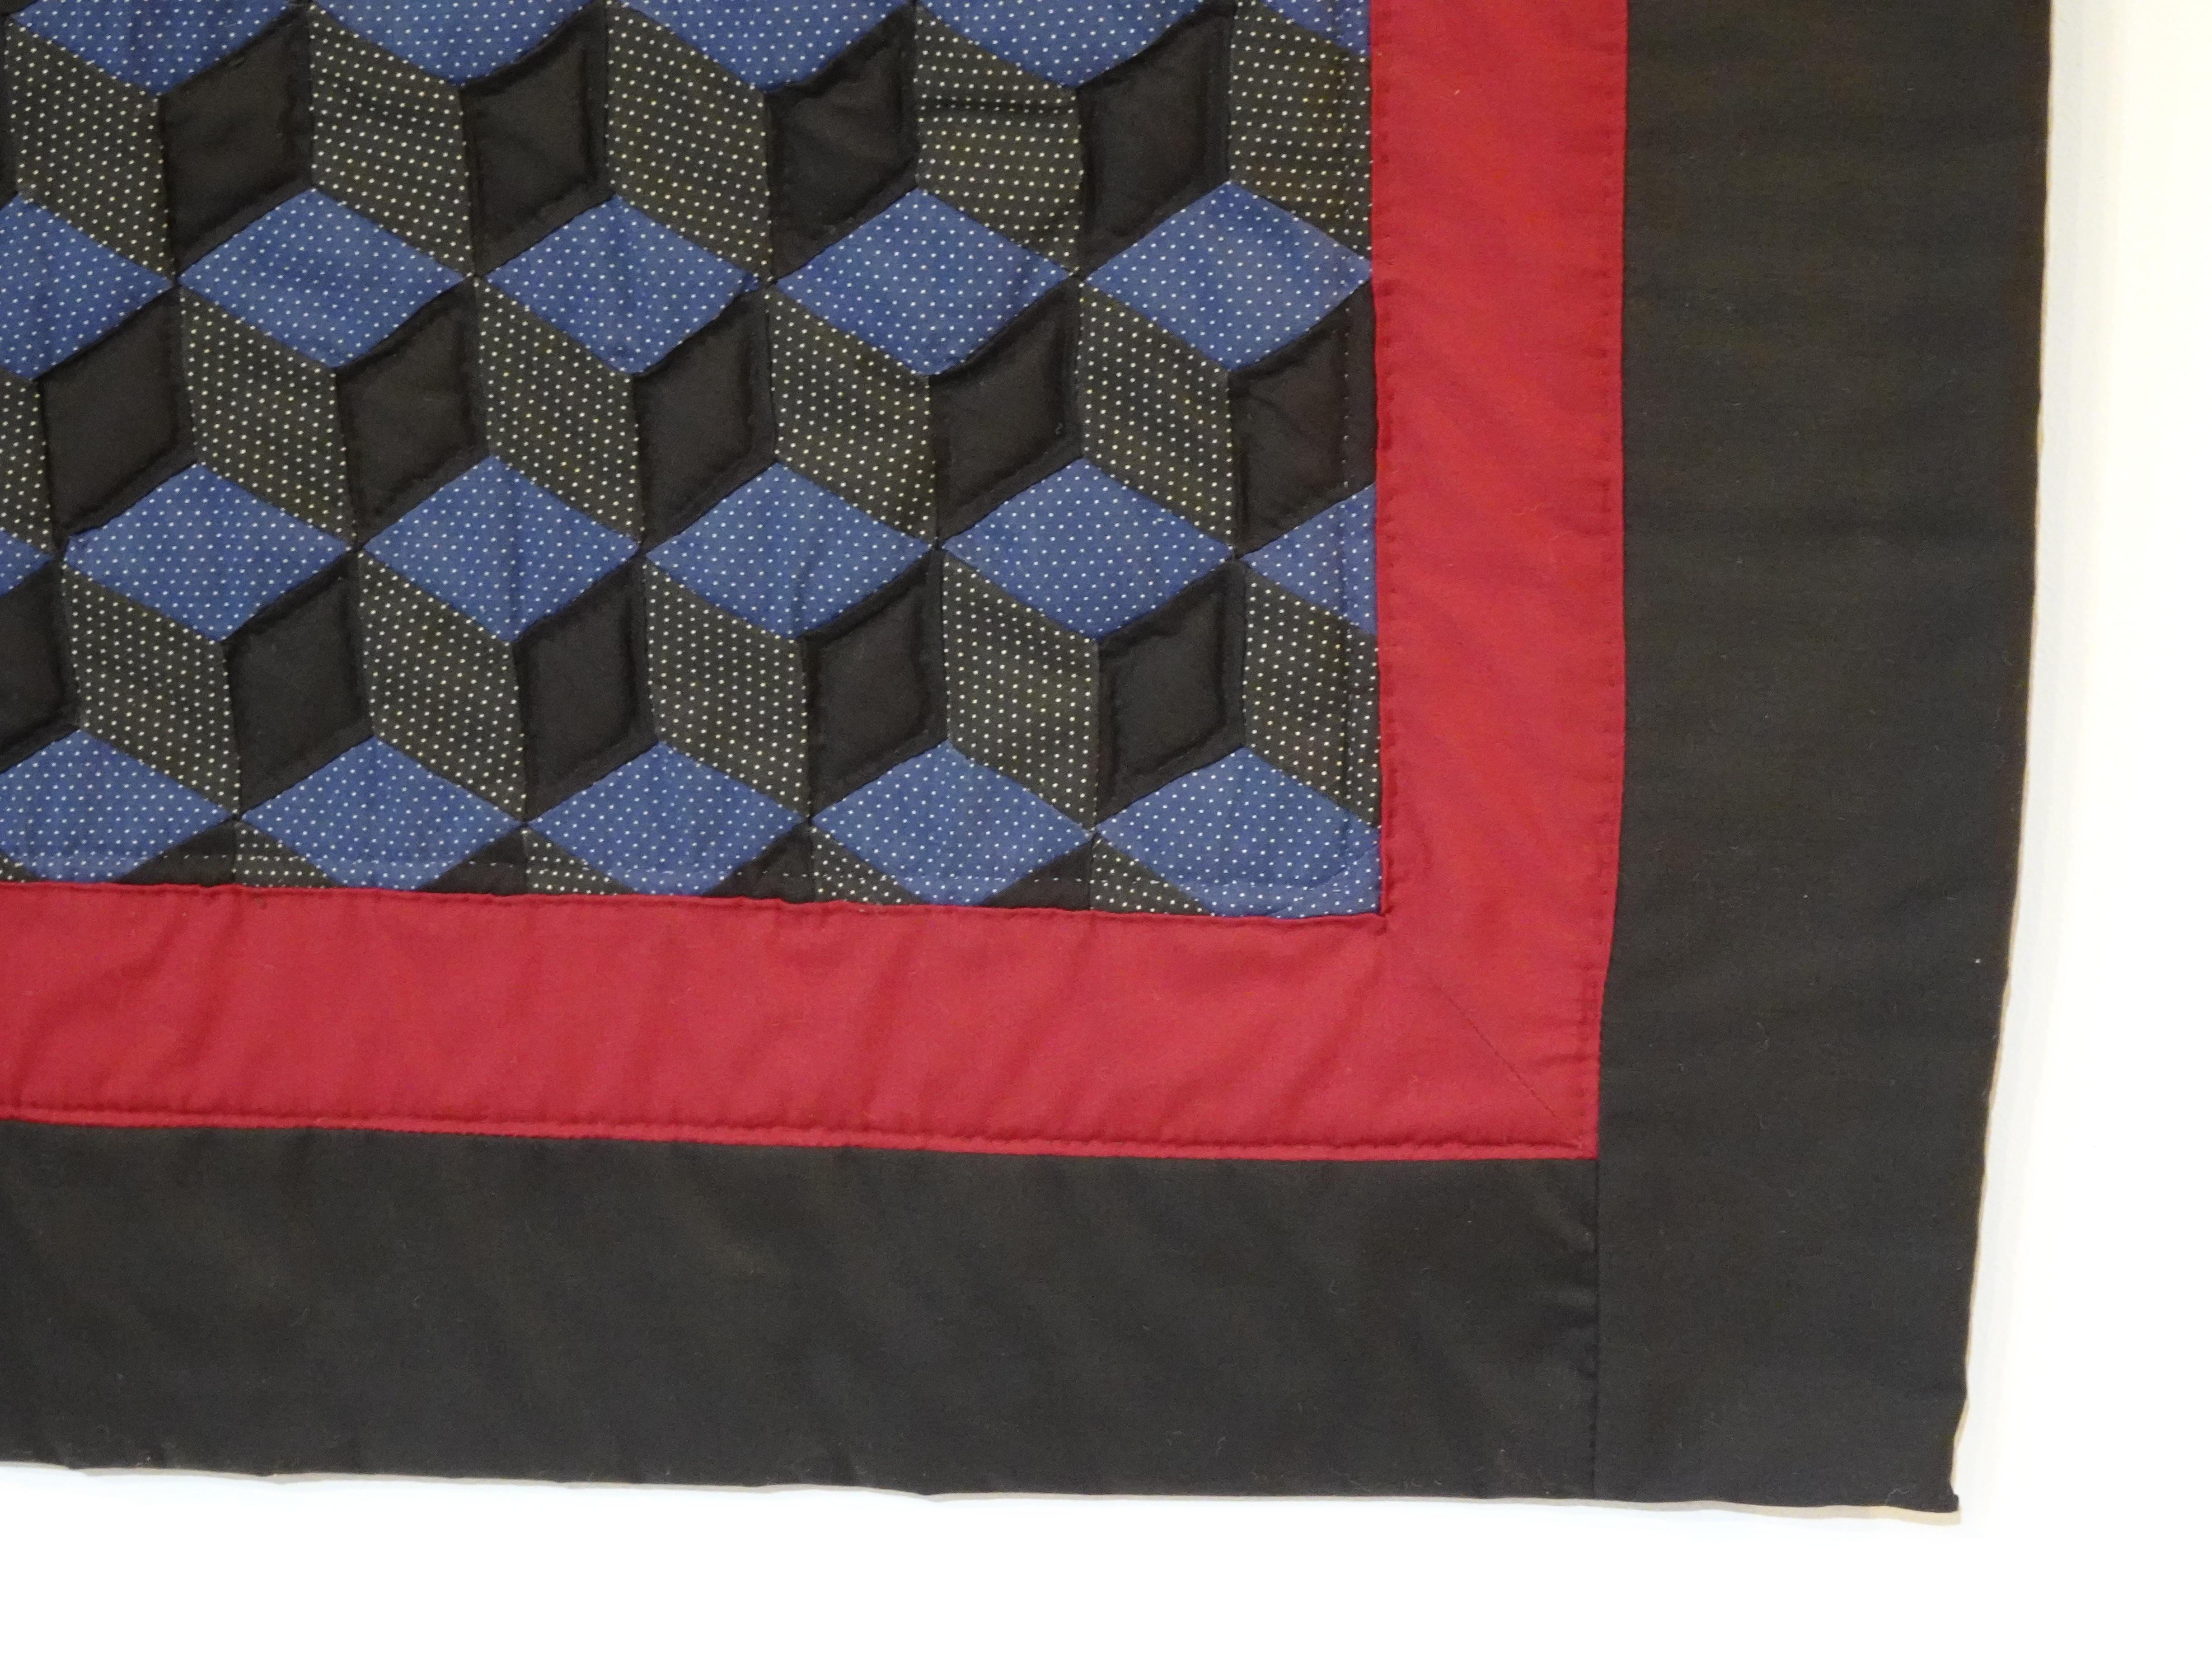 Modern Master Quilter Nina M. Groves Small Geometric Wall Hanging Quilt For Sale